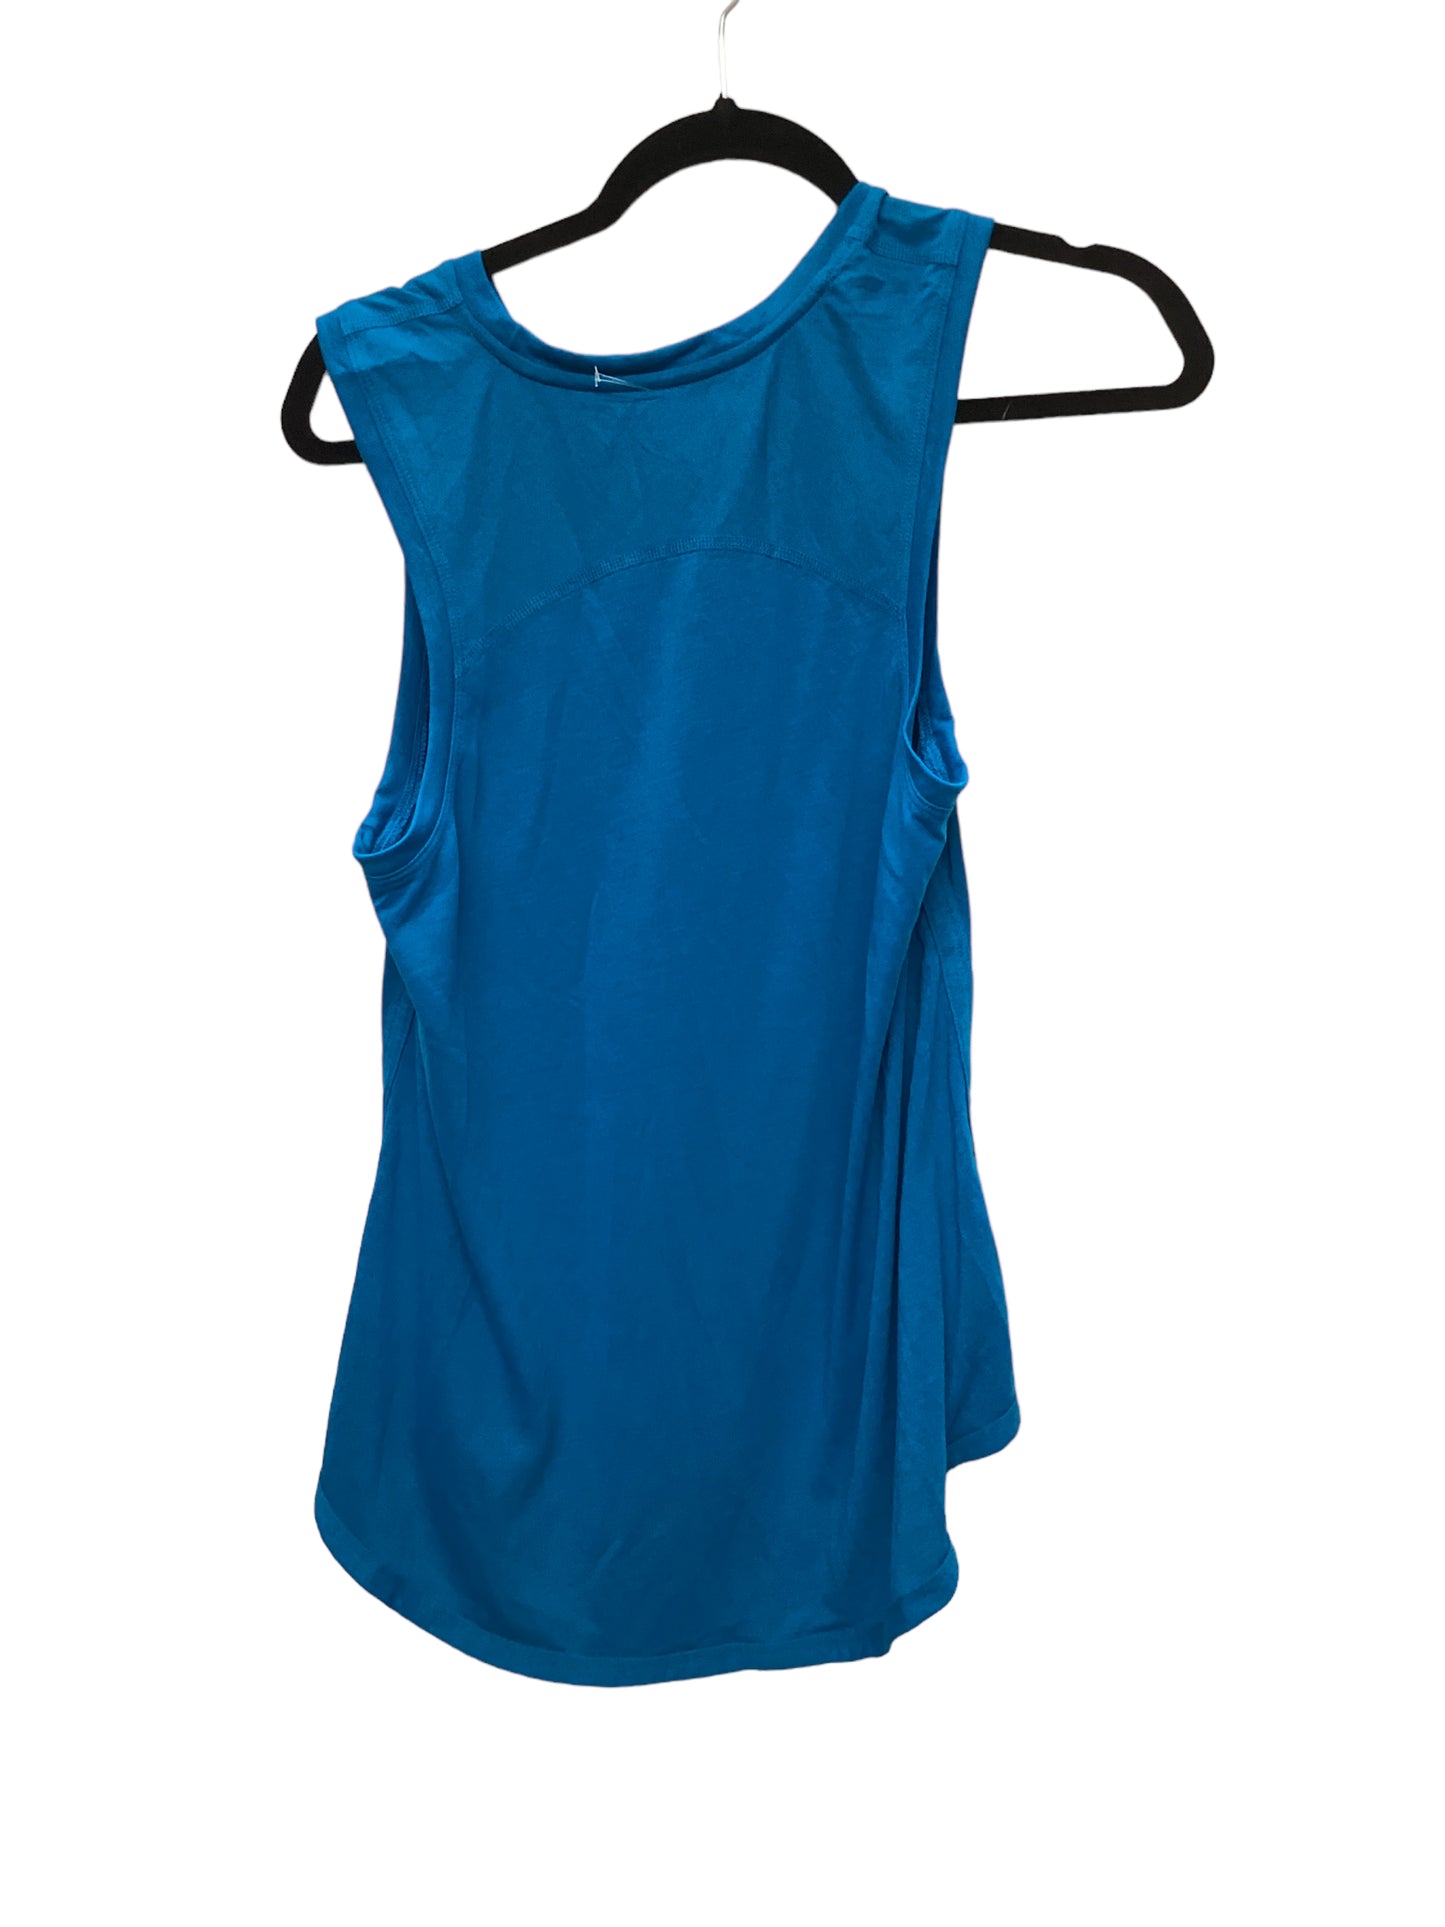 Athletic Tank Top By Athletic Works  Size: M